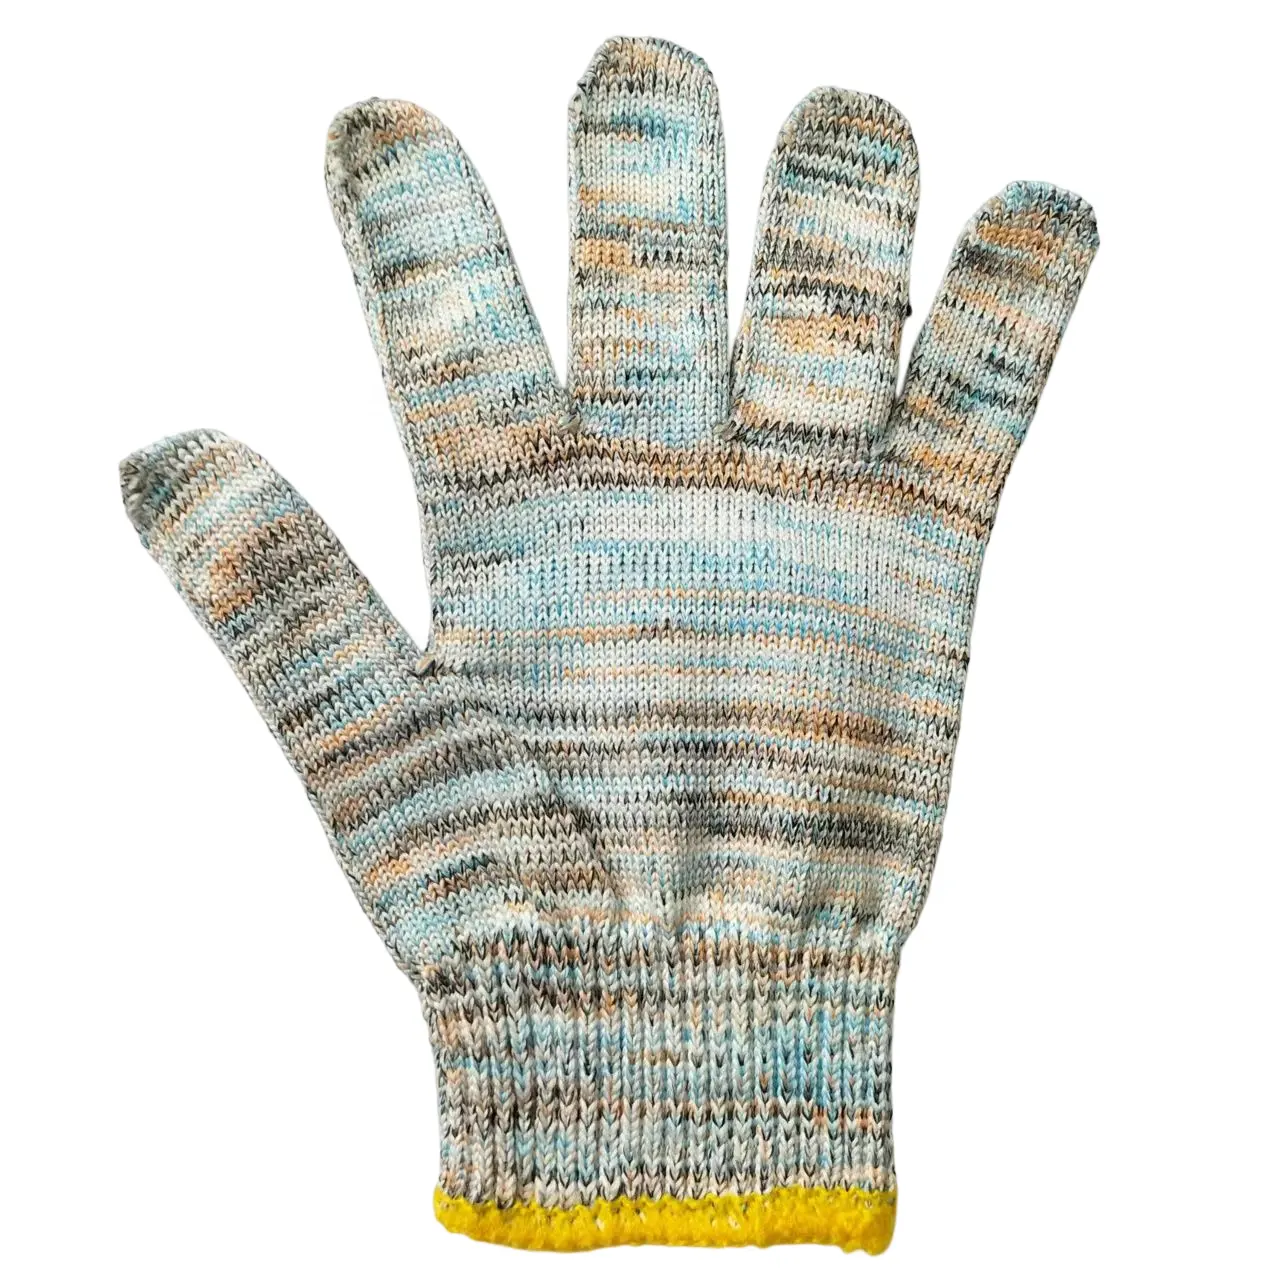 High Quality Mixed Color 500g Nylon Knitted Safety Working Colored Cotton Yarn Gloves For Construction Work